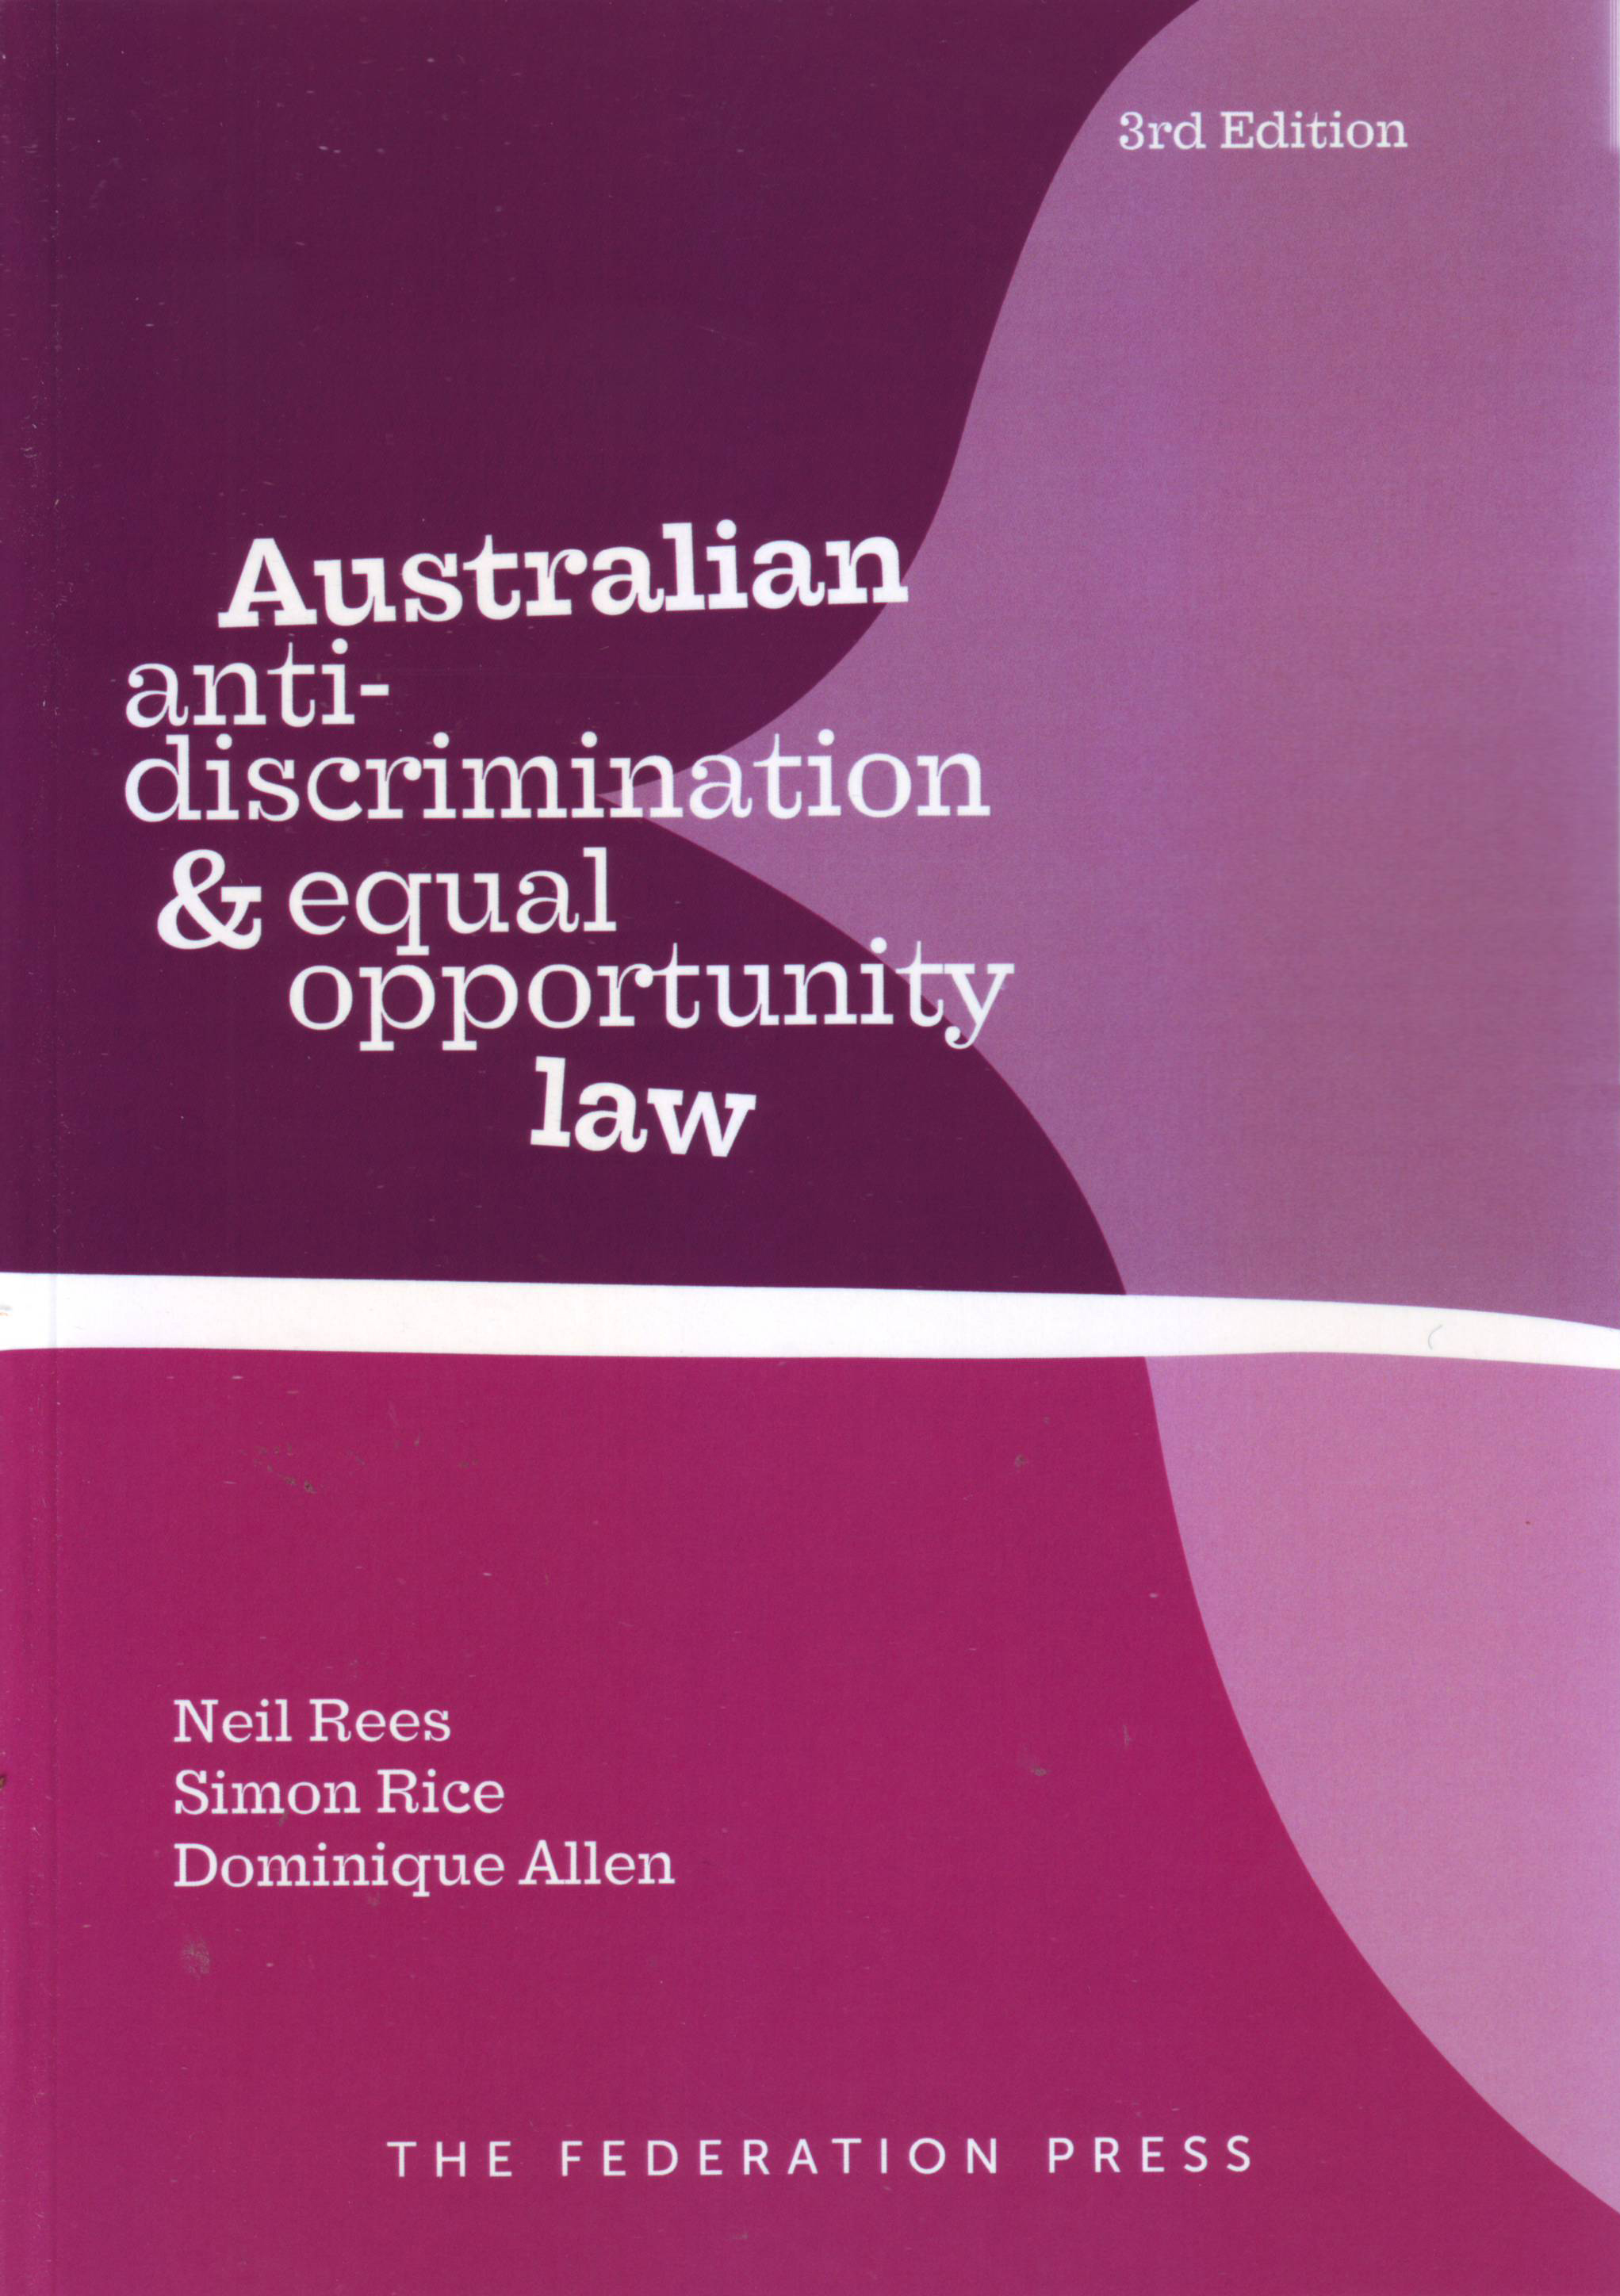 Australian Anti-Discrimination and Equal Opportunity Law e3